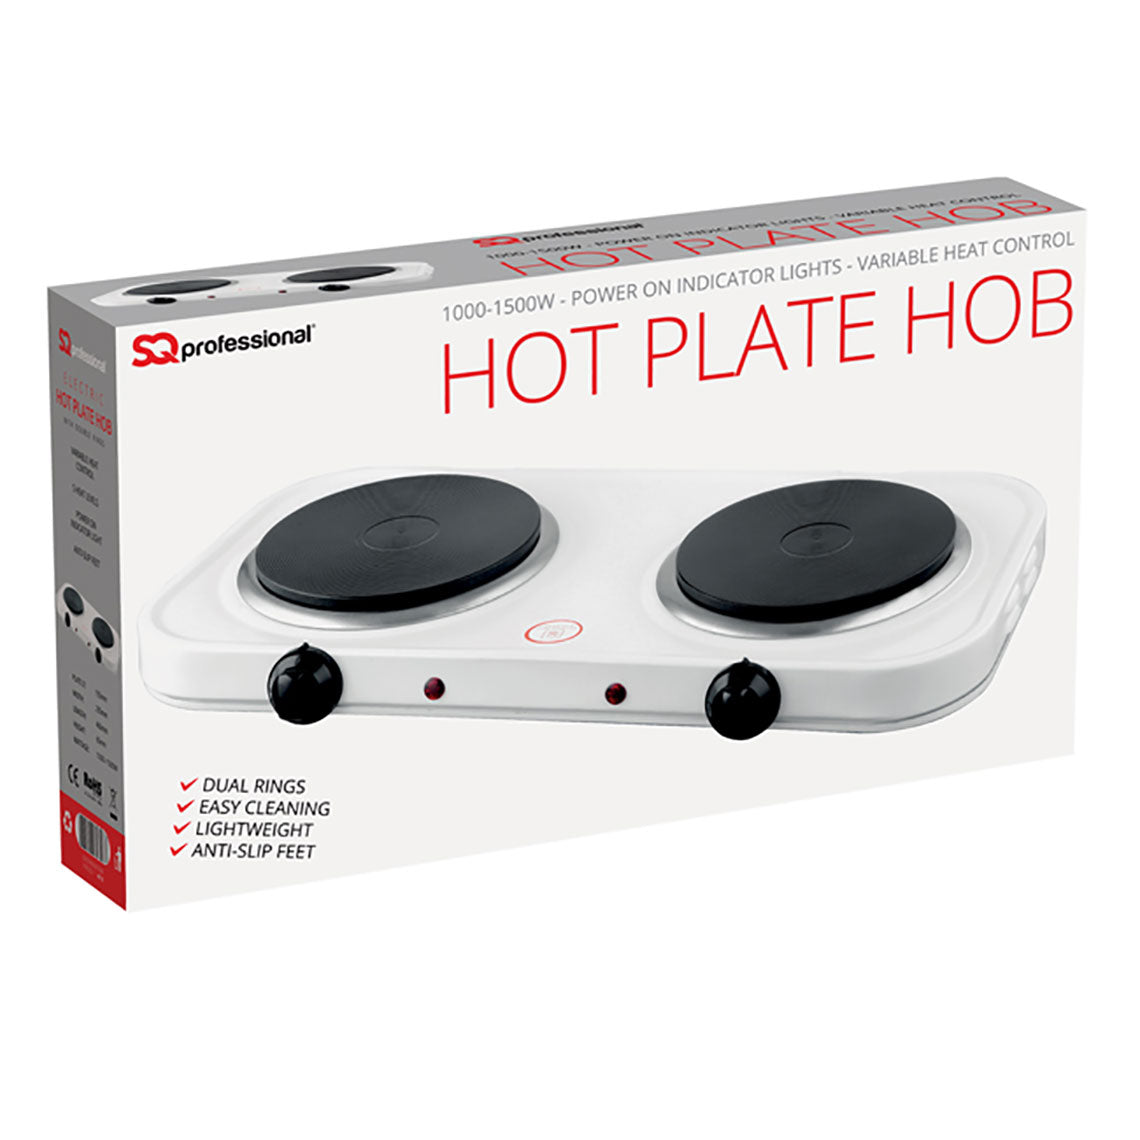 SQ Professional Blitz Electric Double Hot Plate Hob 1000 - 1500W 4010 (Parcel Rate)